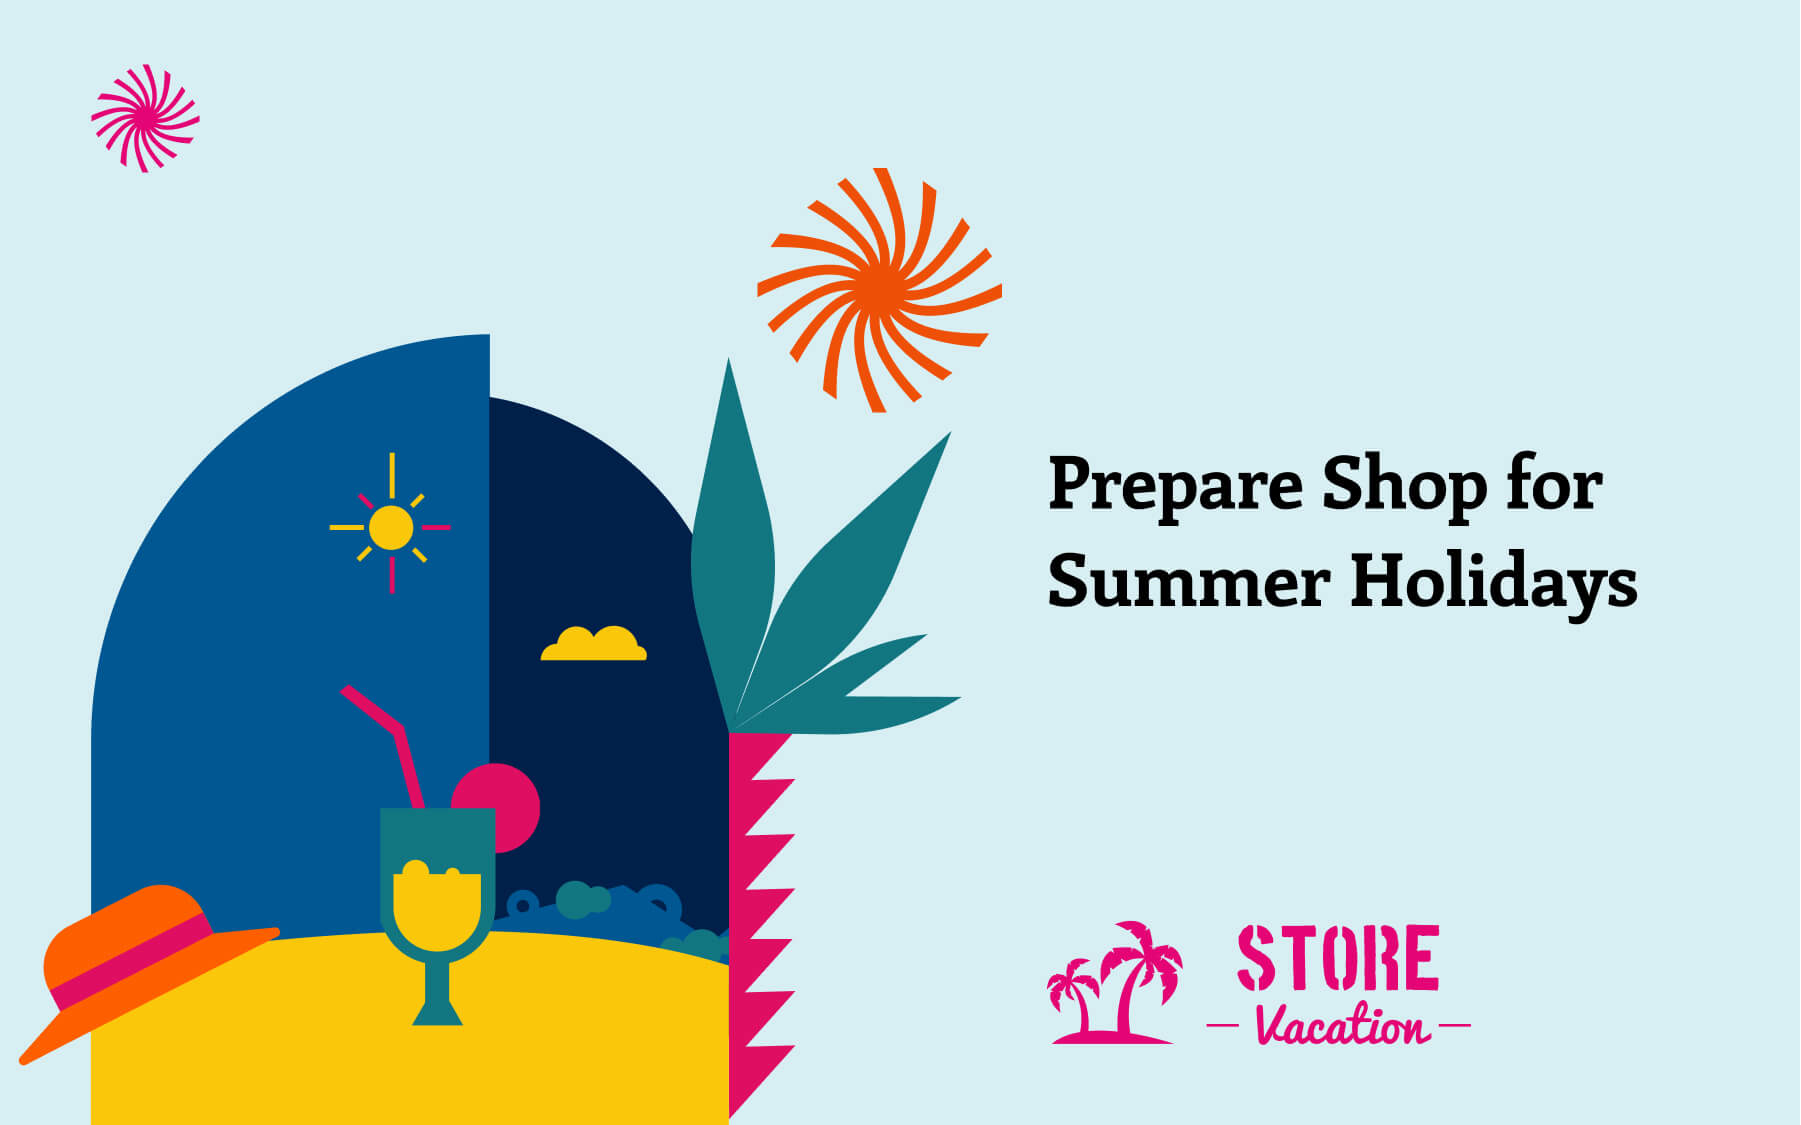 Prepare Your Shop for the Summer Holidays